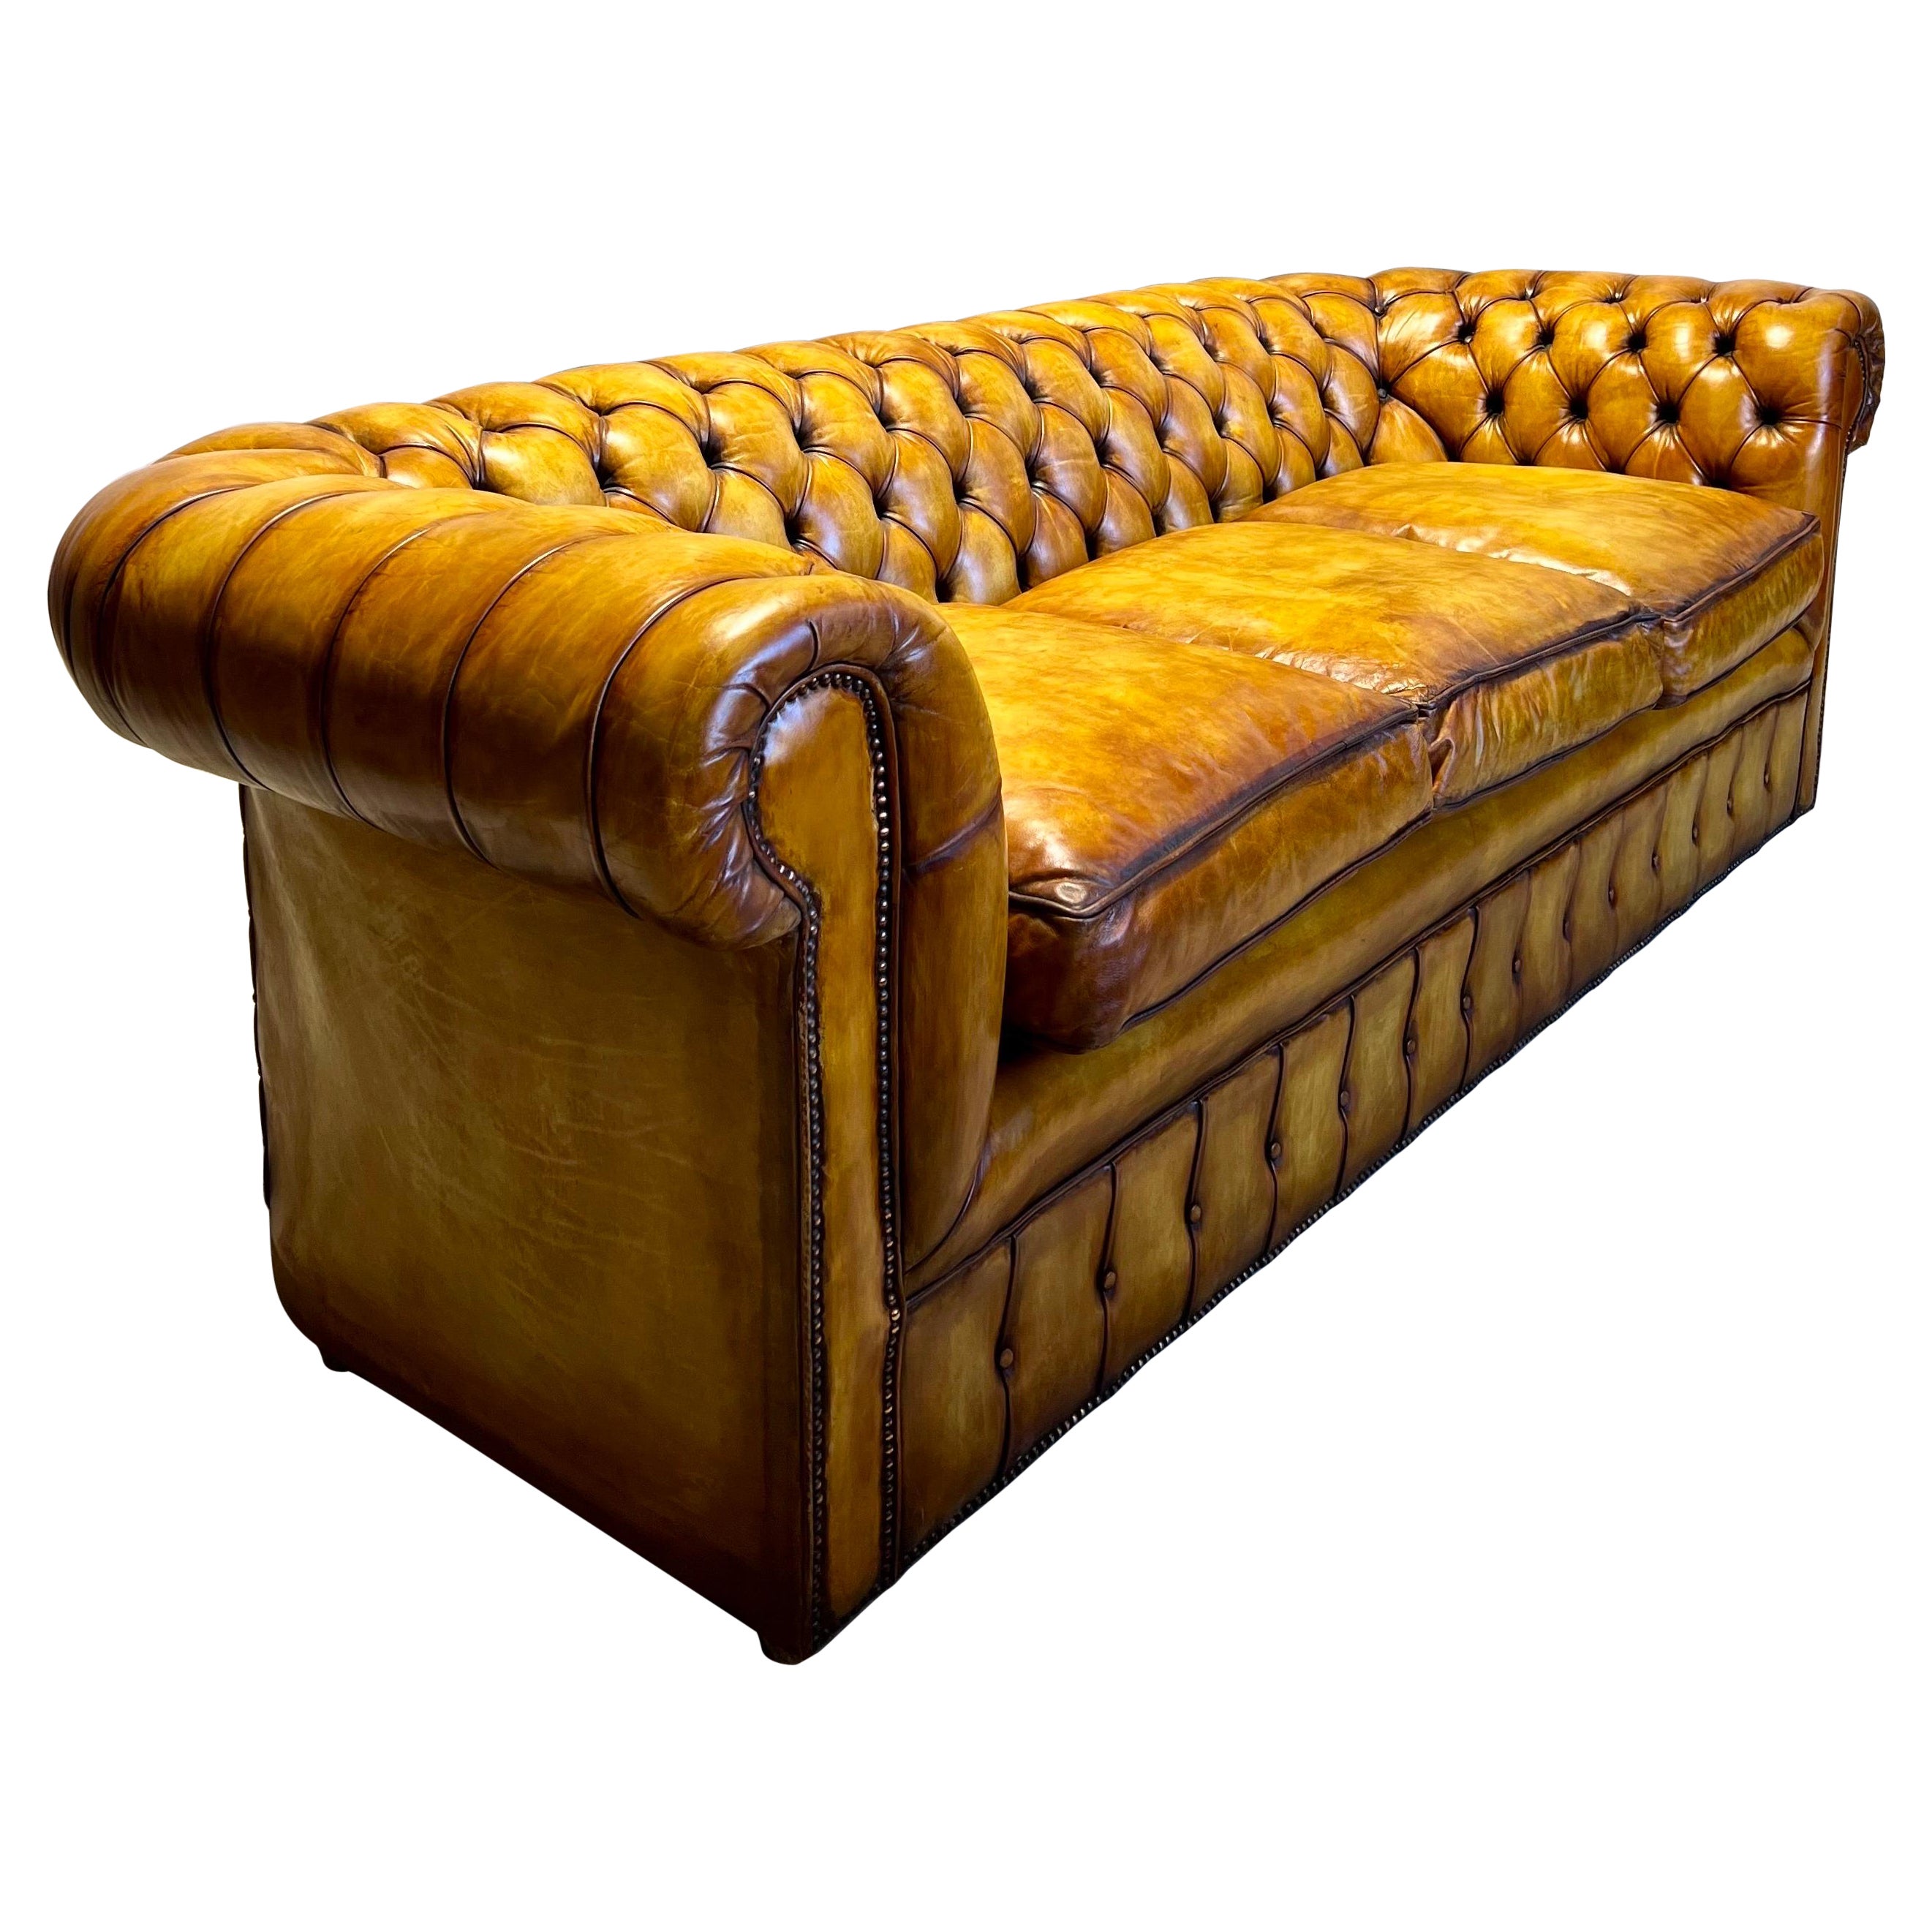 Beautiful Mid-C Leather Chesterfield Sofa in Hand Dyed Golden Tans For Sale